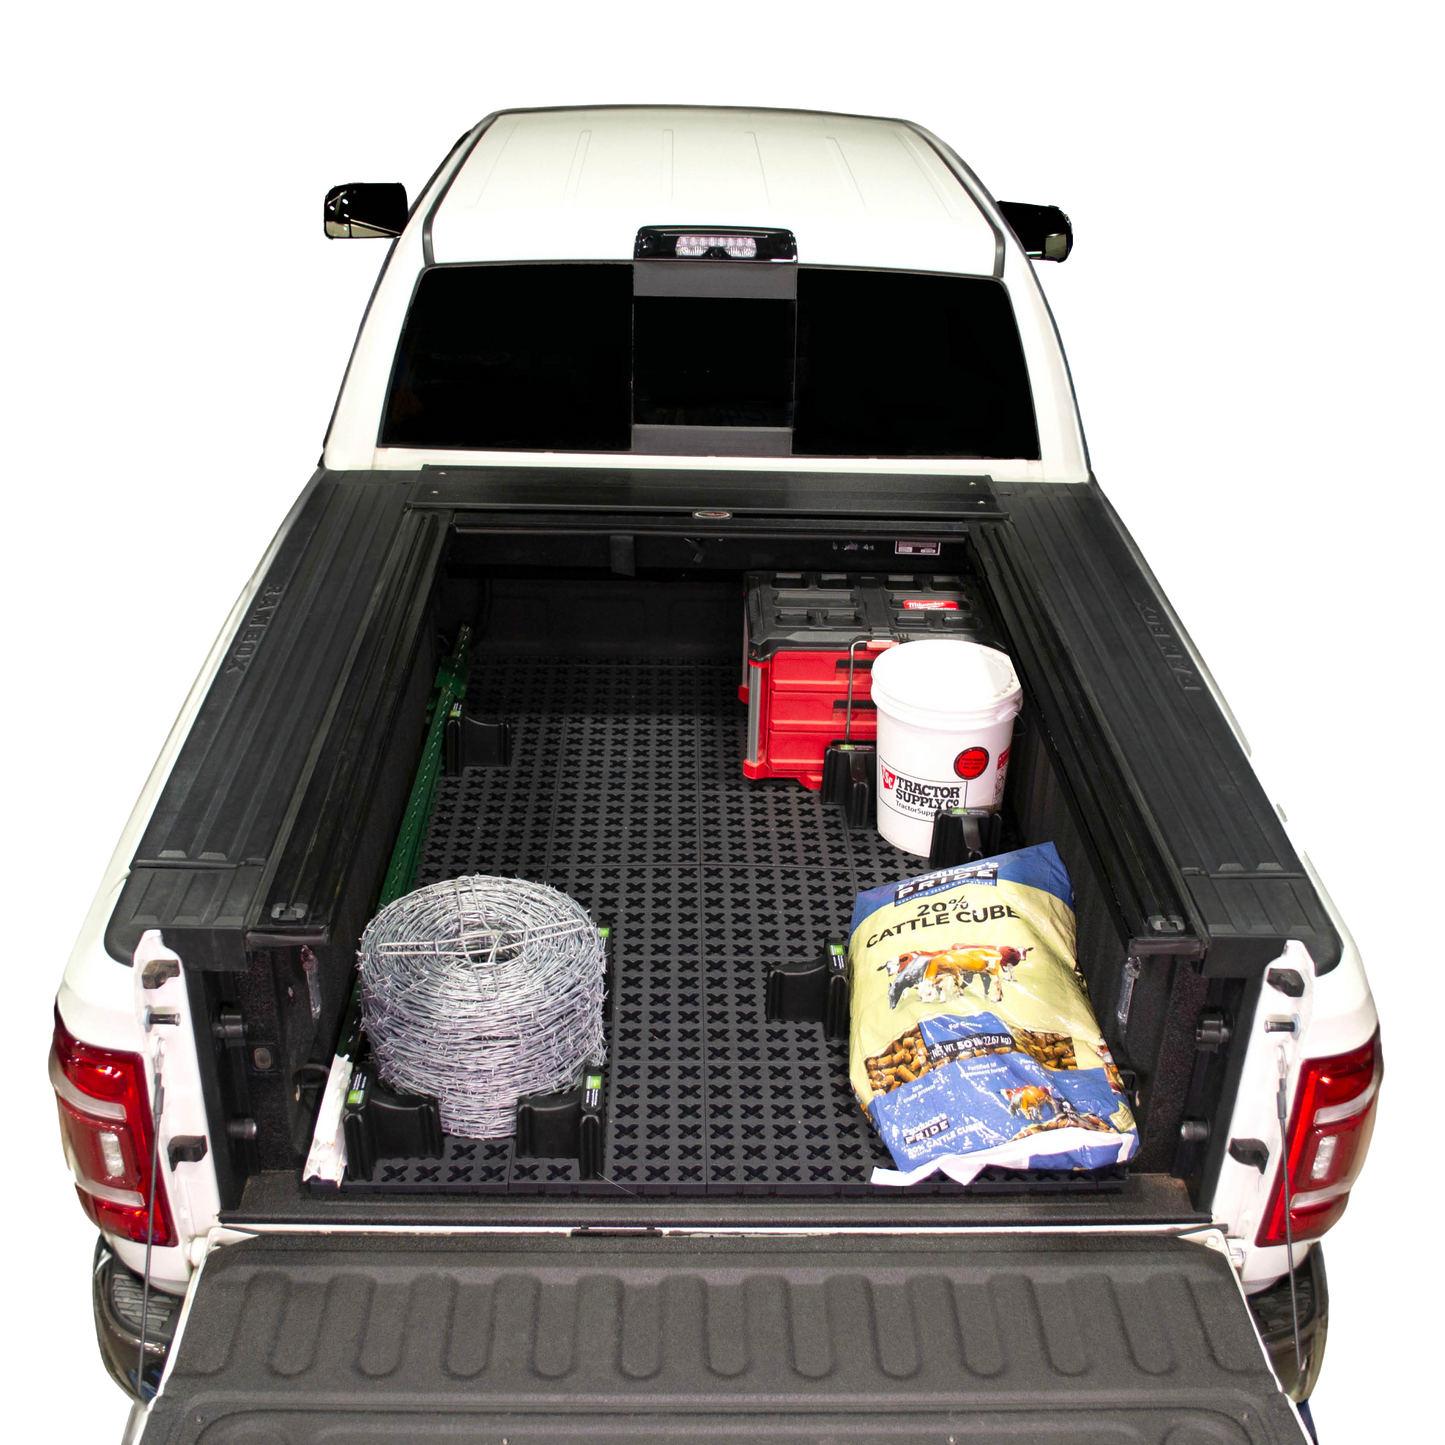 Tmat Cargo System in a Ram pickup bed with a bucket, t-posts, barb wire, a bag of cattle feed, and Milwaukee Packout toolbox.